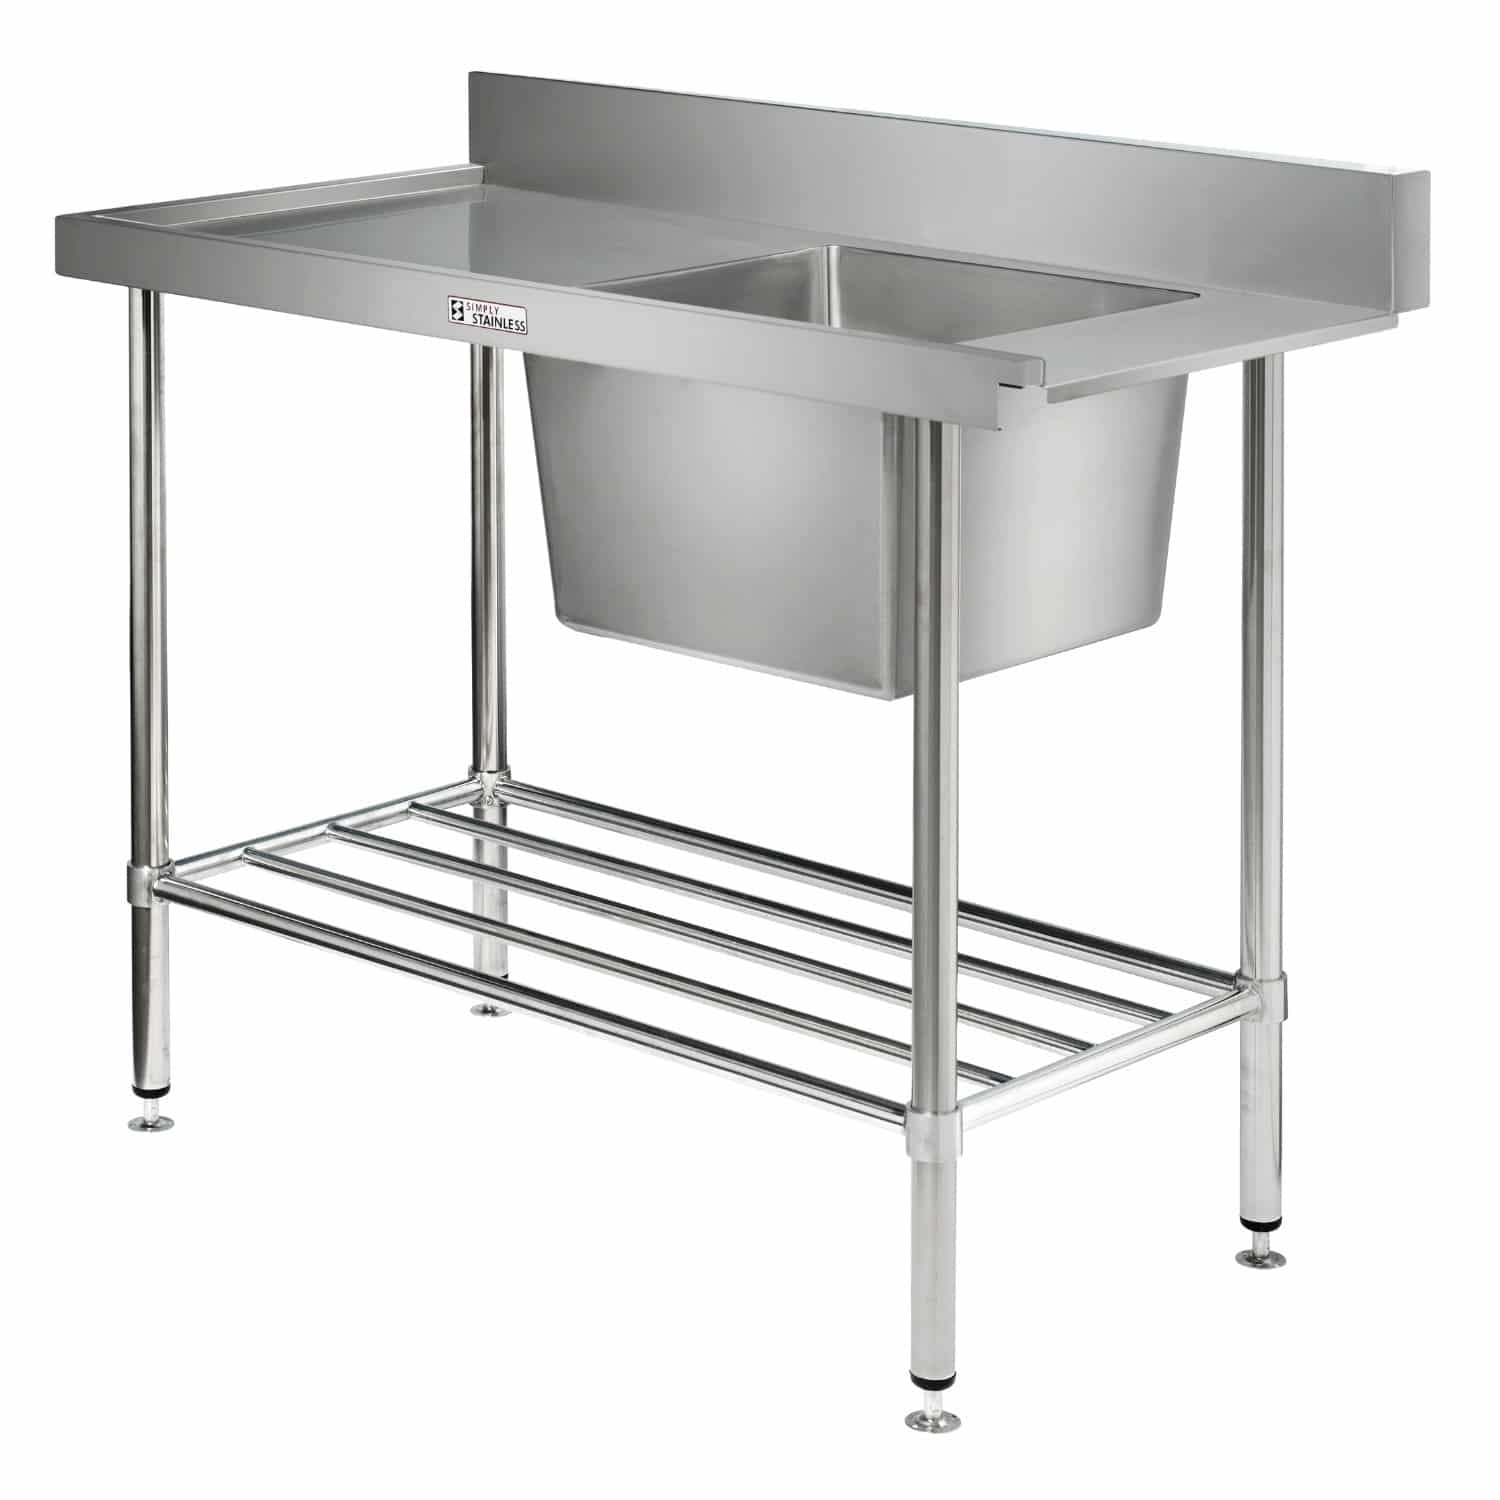 Simply Stainless dishwasher inlet and outlet benches and sinks